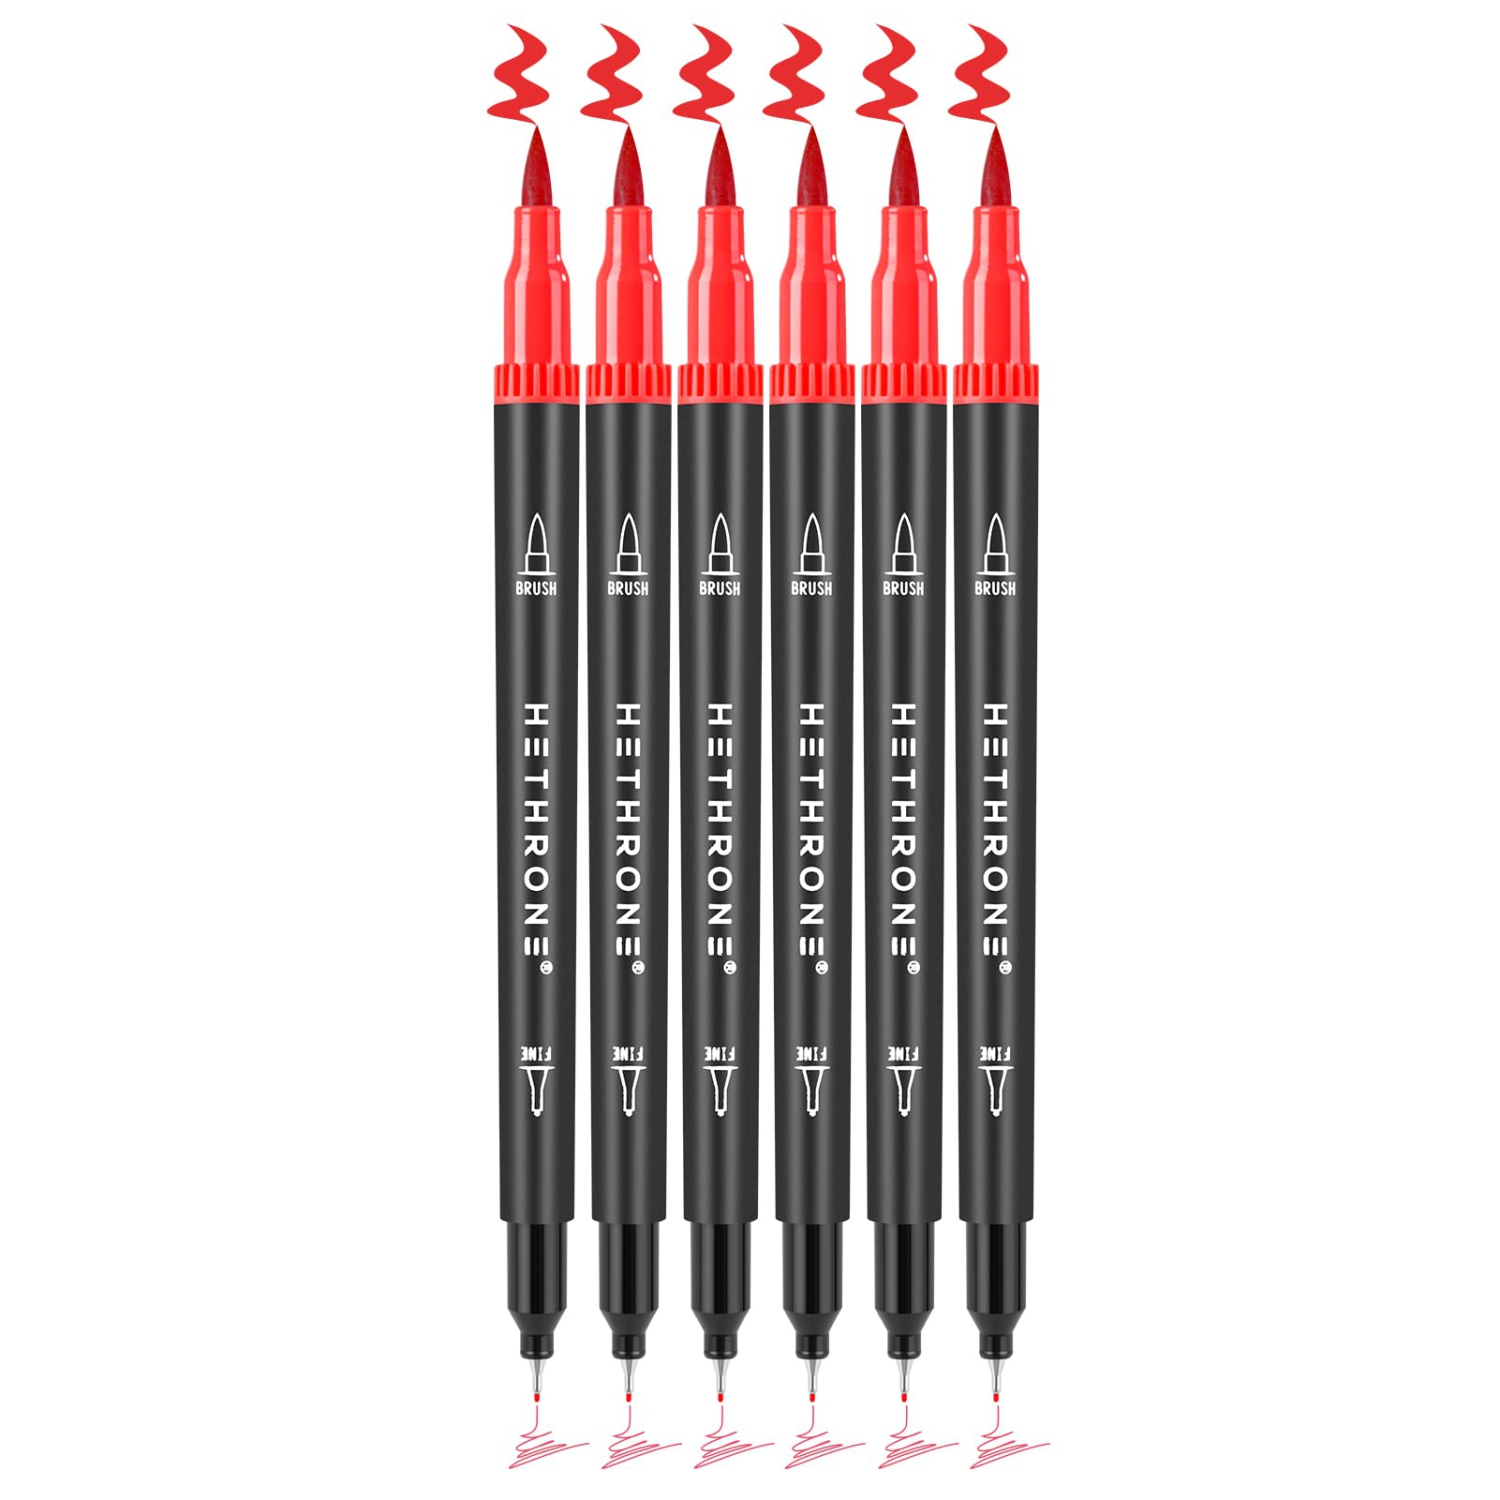 ColorBlend Dual Tip Brush Pens - Fine Tip Markers for Calligraphy, Painting, and Drawing - Set of 6 - Rouge Orange